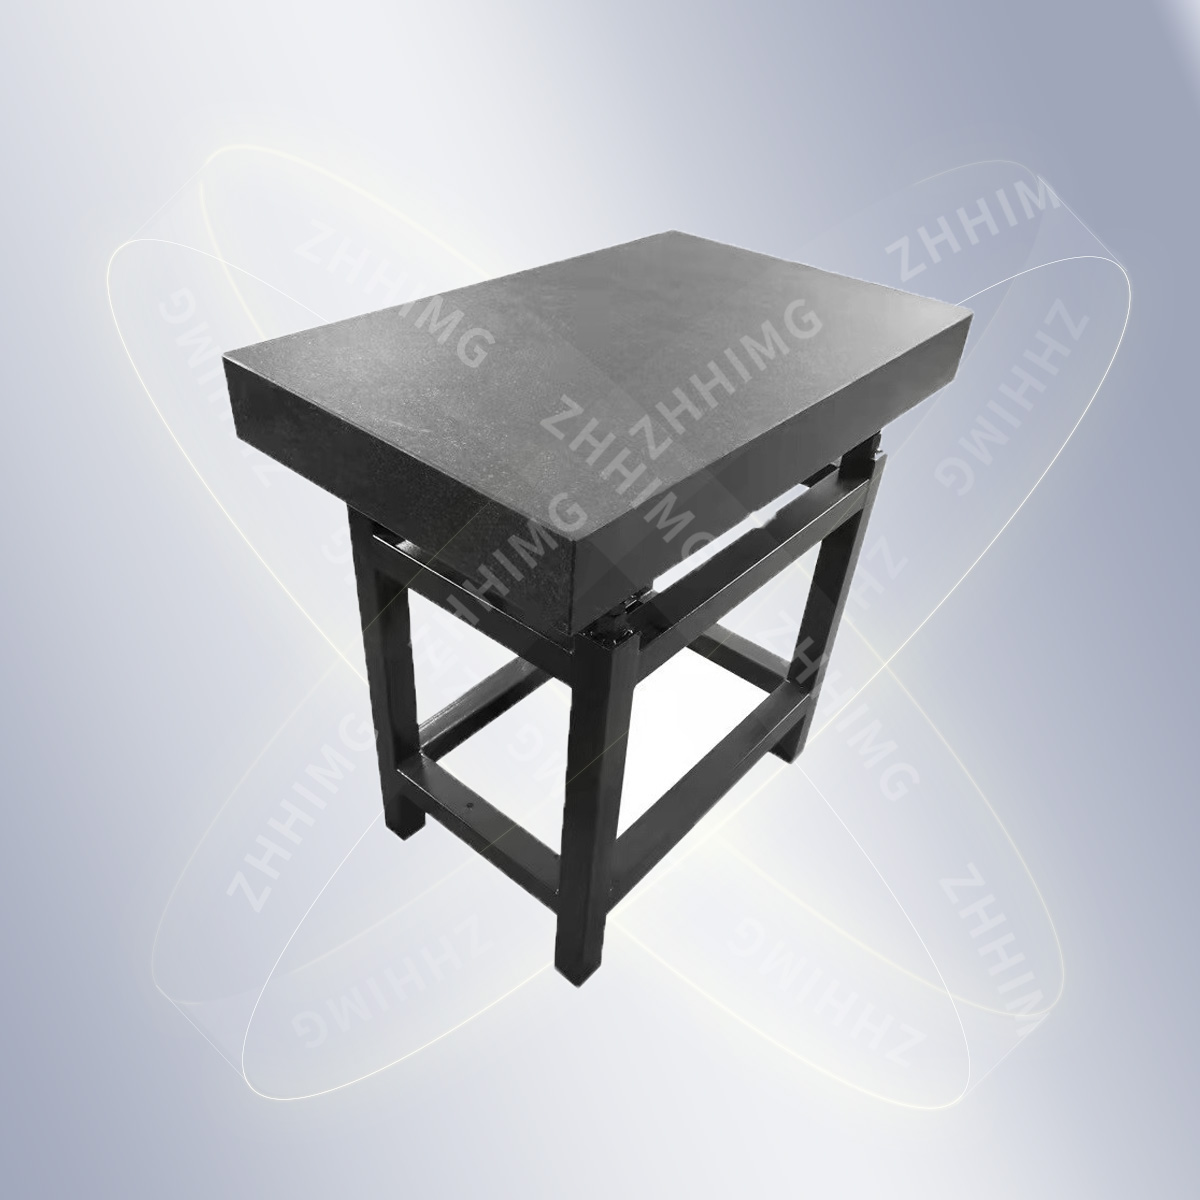 China OEM Design& Checking Drawings - Granite Inspection Surface Plates & Tables – ZHONGHUI